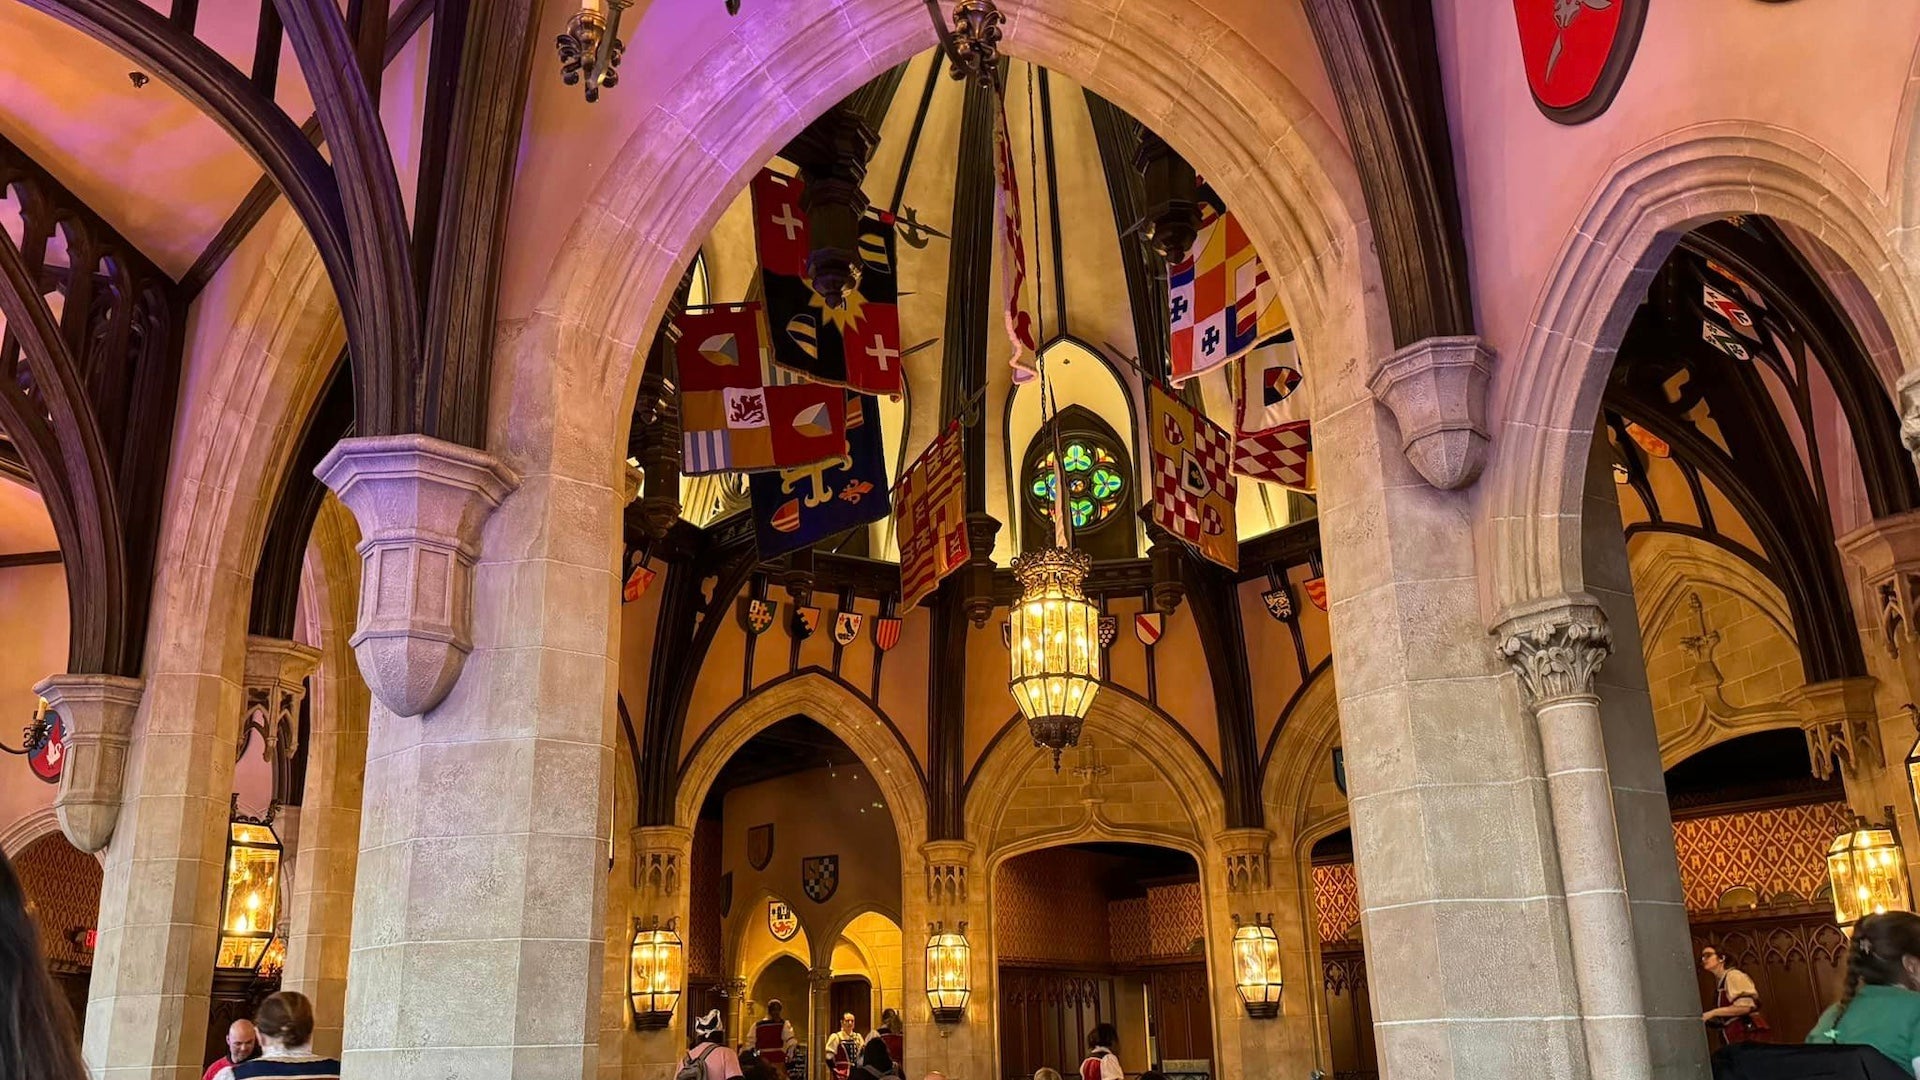 Interior shot of a castle looking up at flags and arched ceilings